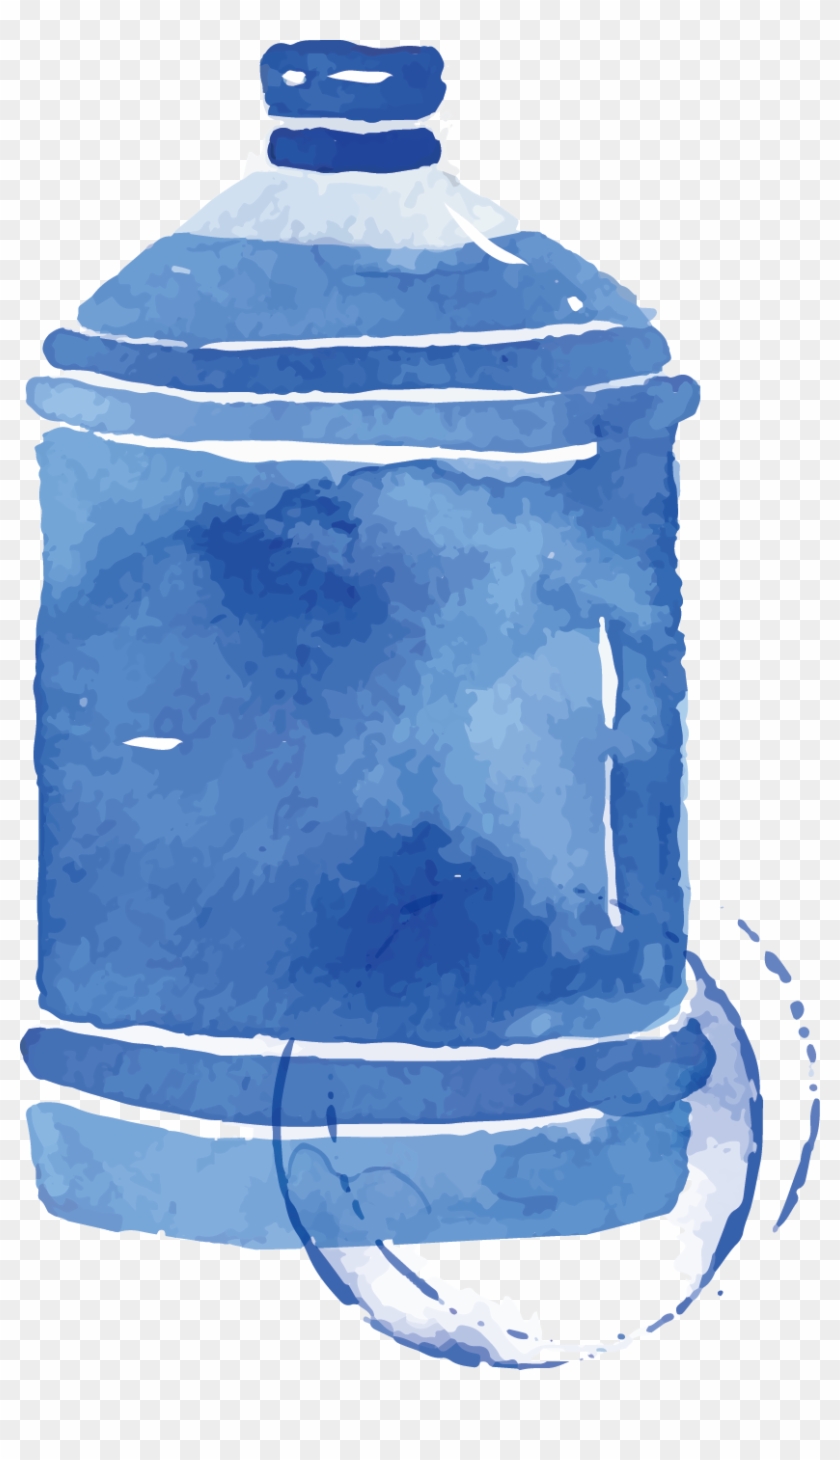 Watercolor Painting - Water Bottle Clipart #5515853